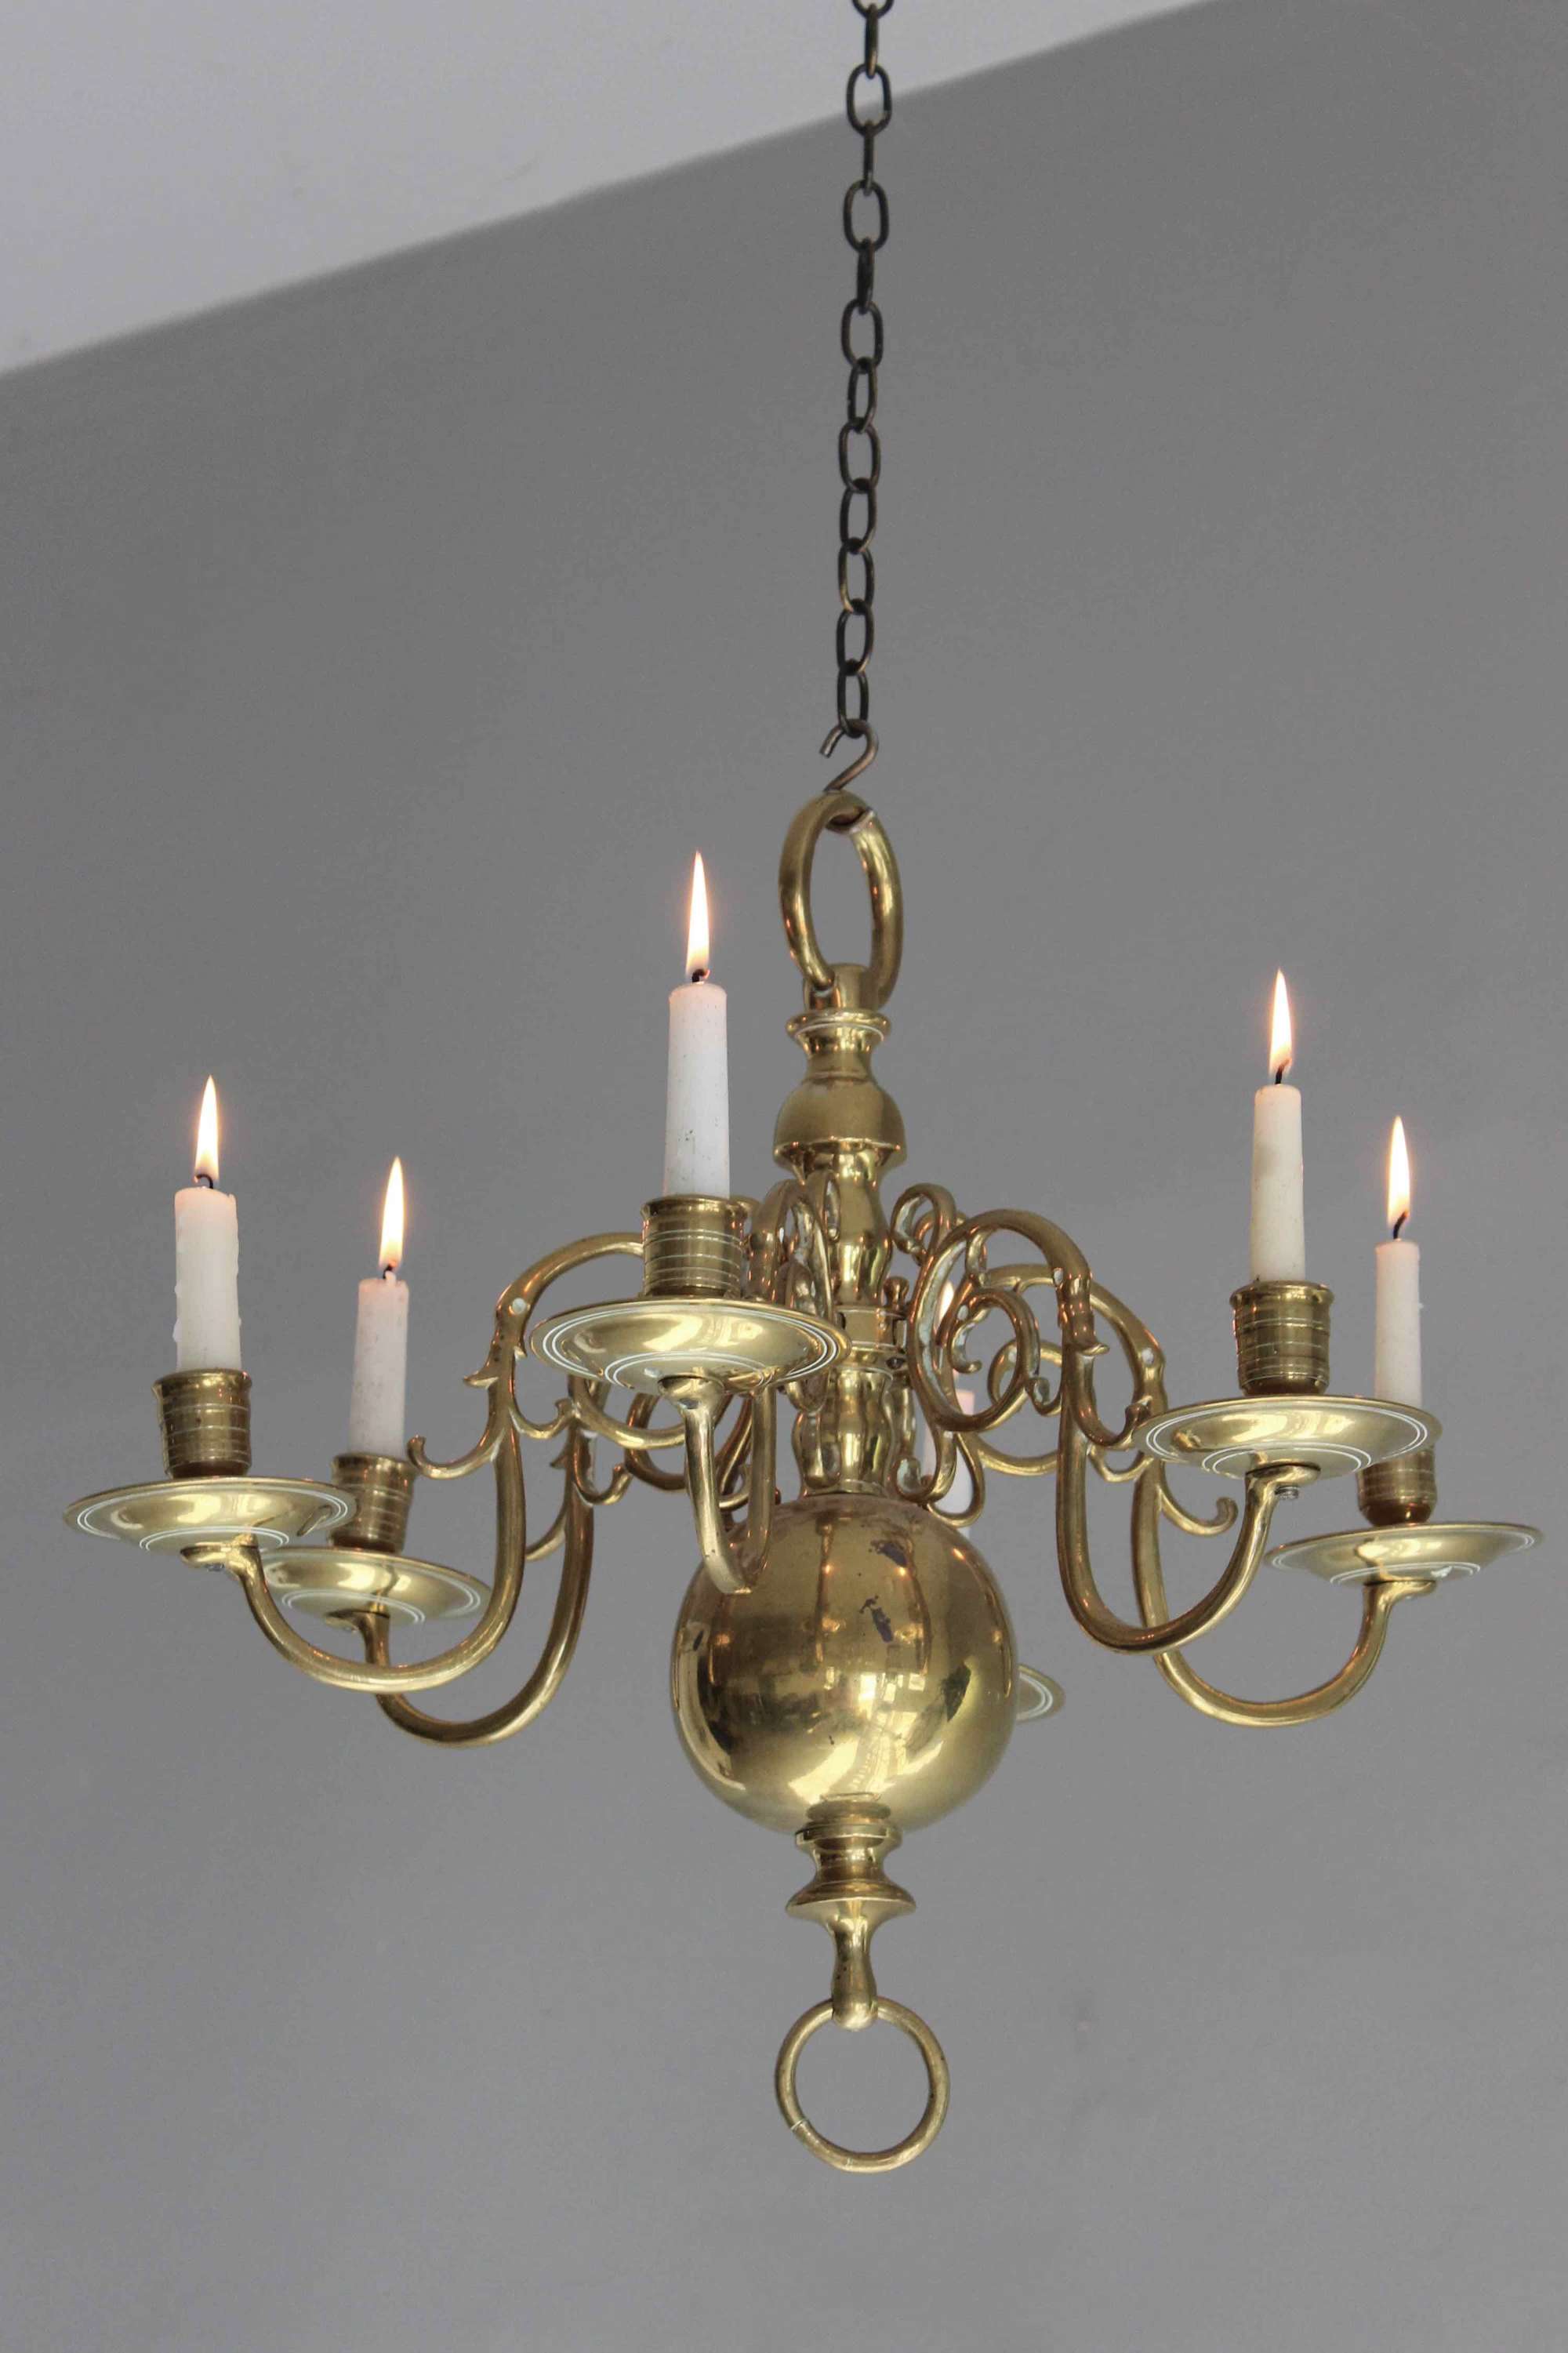 Early 19thC  Dutch style  antique chandelier